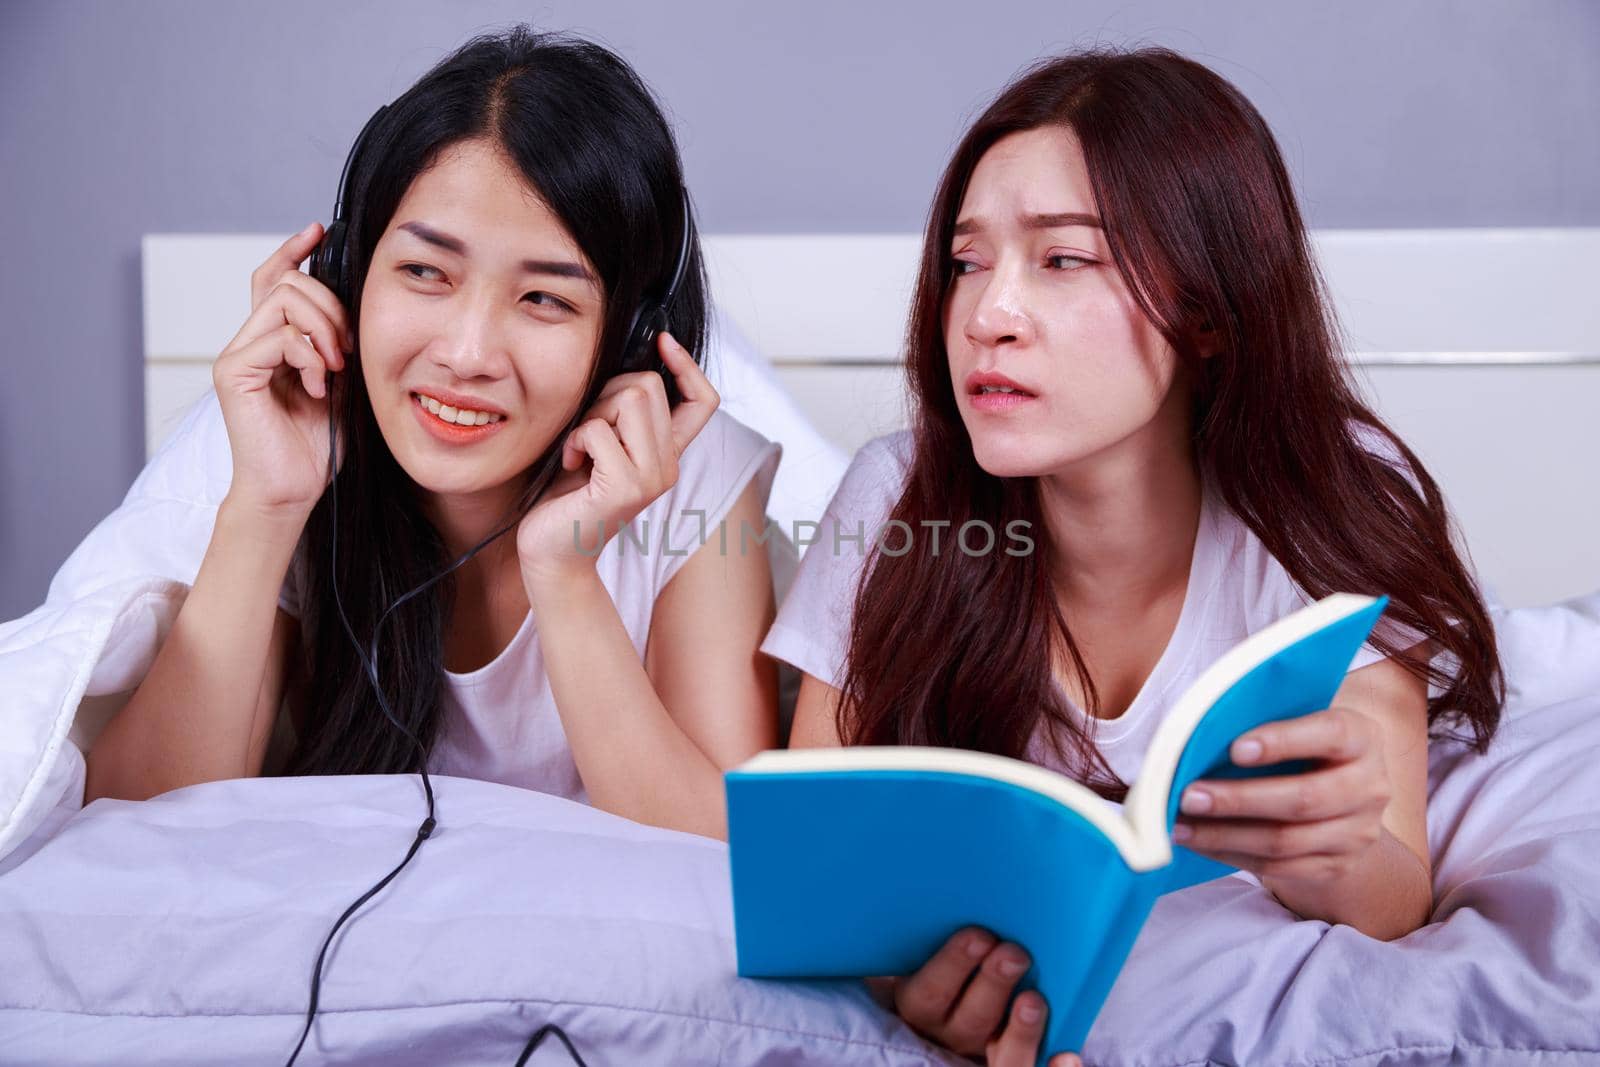 two woman reading a book and using smart phone on bed in bedroom by geargodz